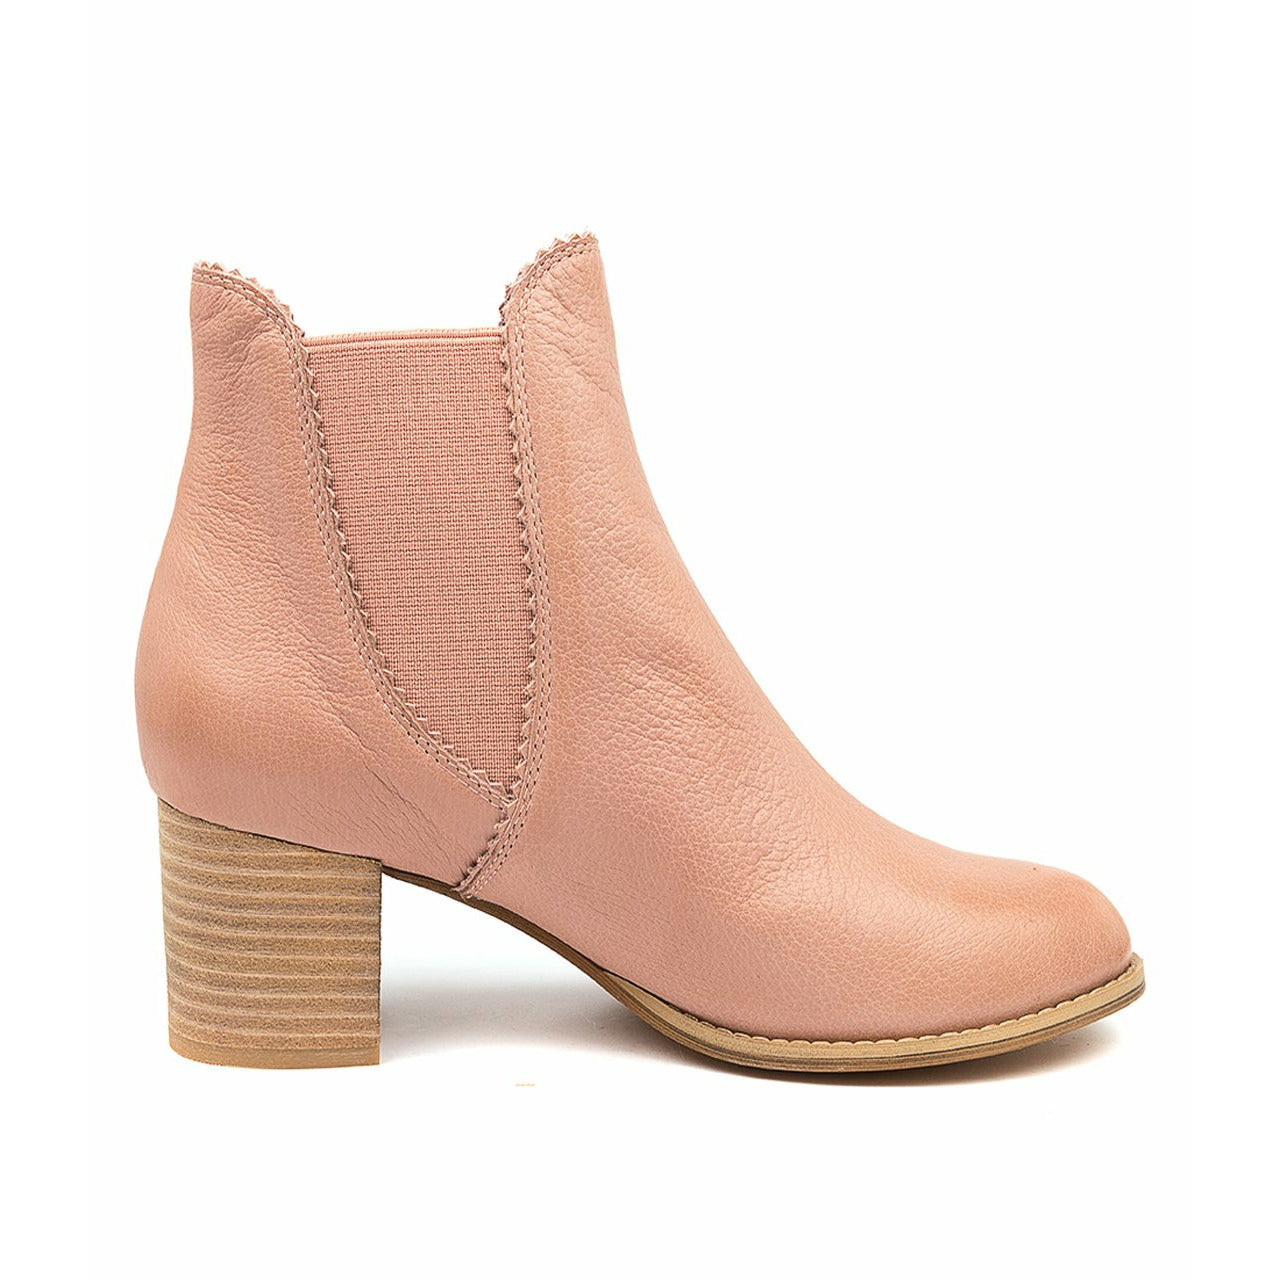 SADORE Boots Pink Leather Boots